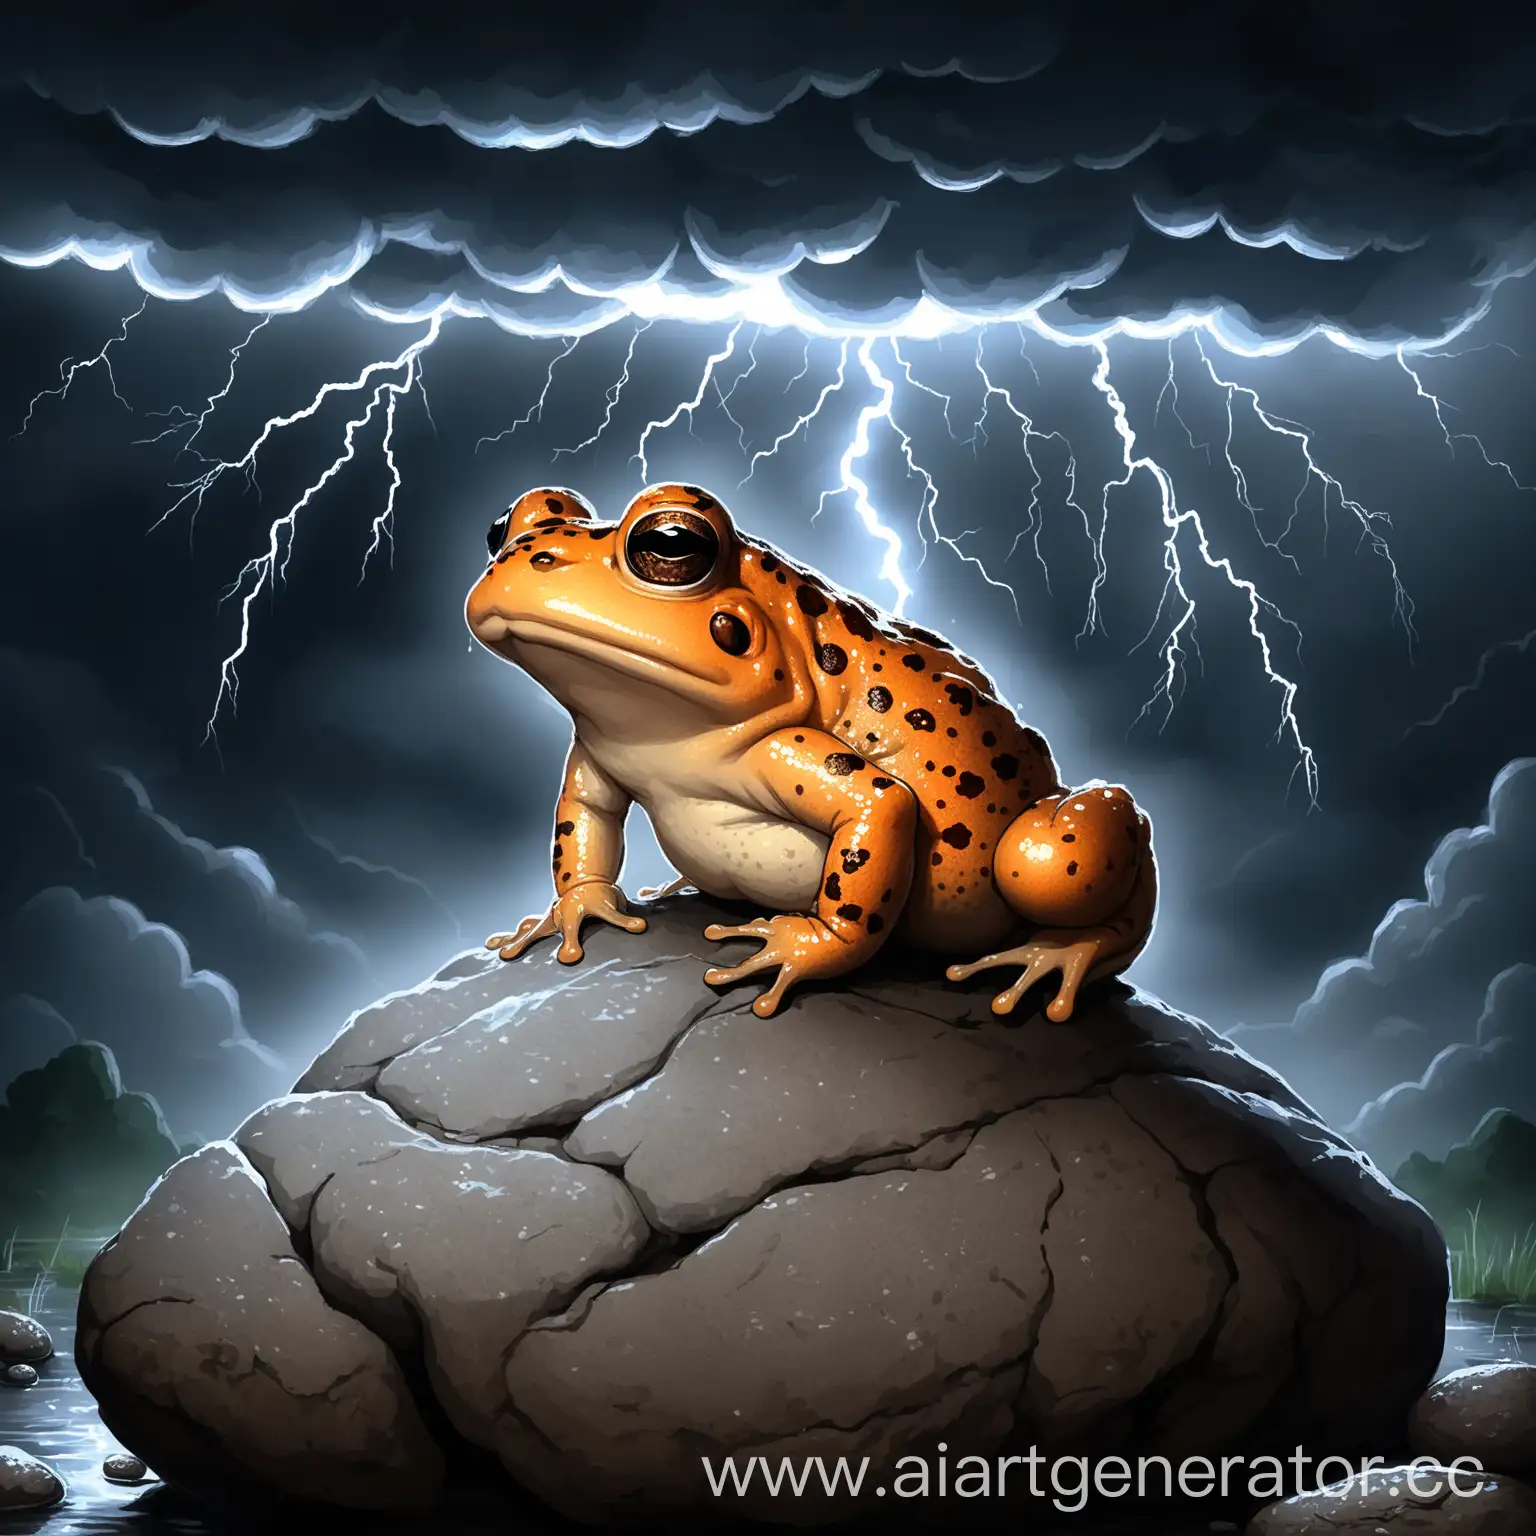 drawing of a small toad, a toad sitting on a stone, against the background of a thunderstorm, the toad has light makeup